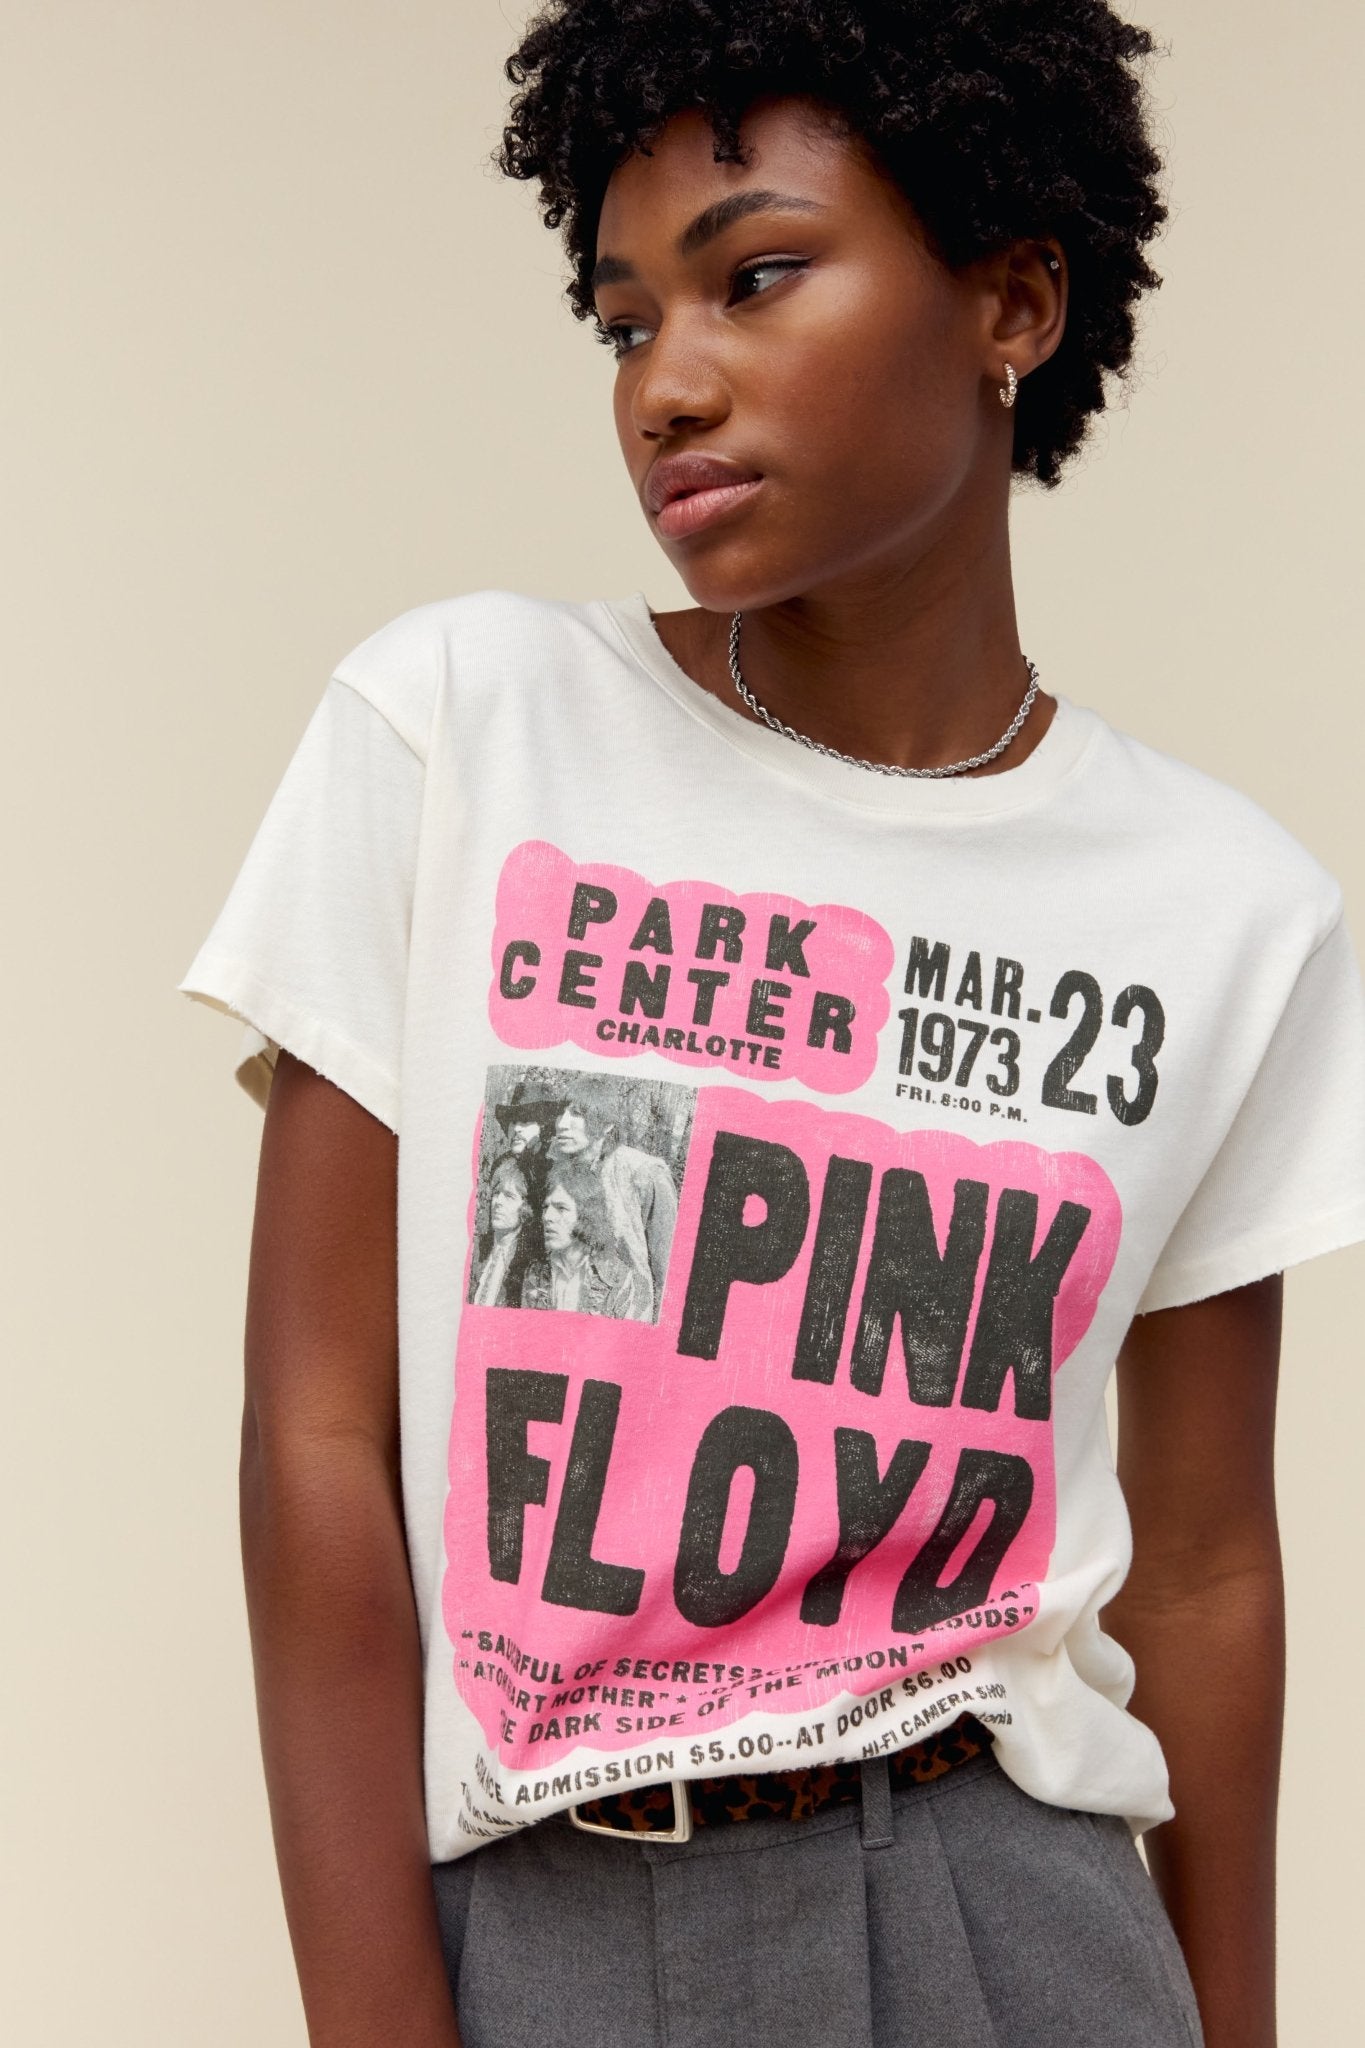 Daydreamer Graphic Tees | Pink Floyd 1973 | Tour T-Shirt - Women's Shirts & Tops - Blooming Daily